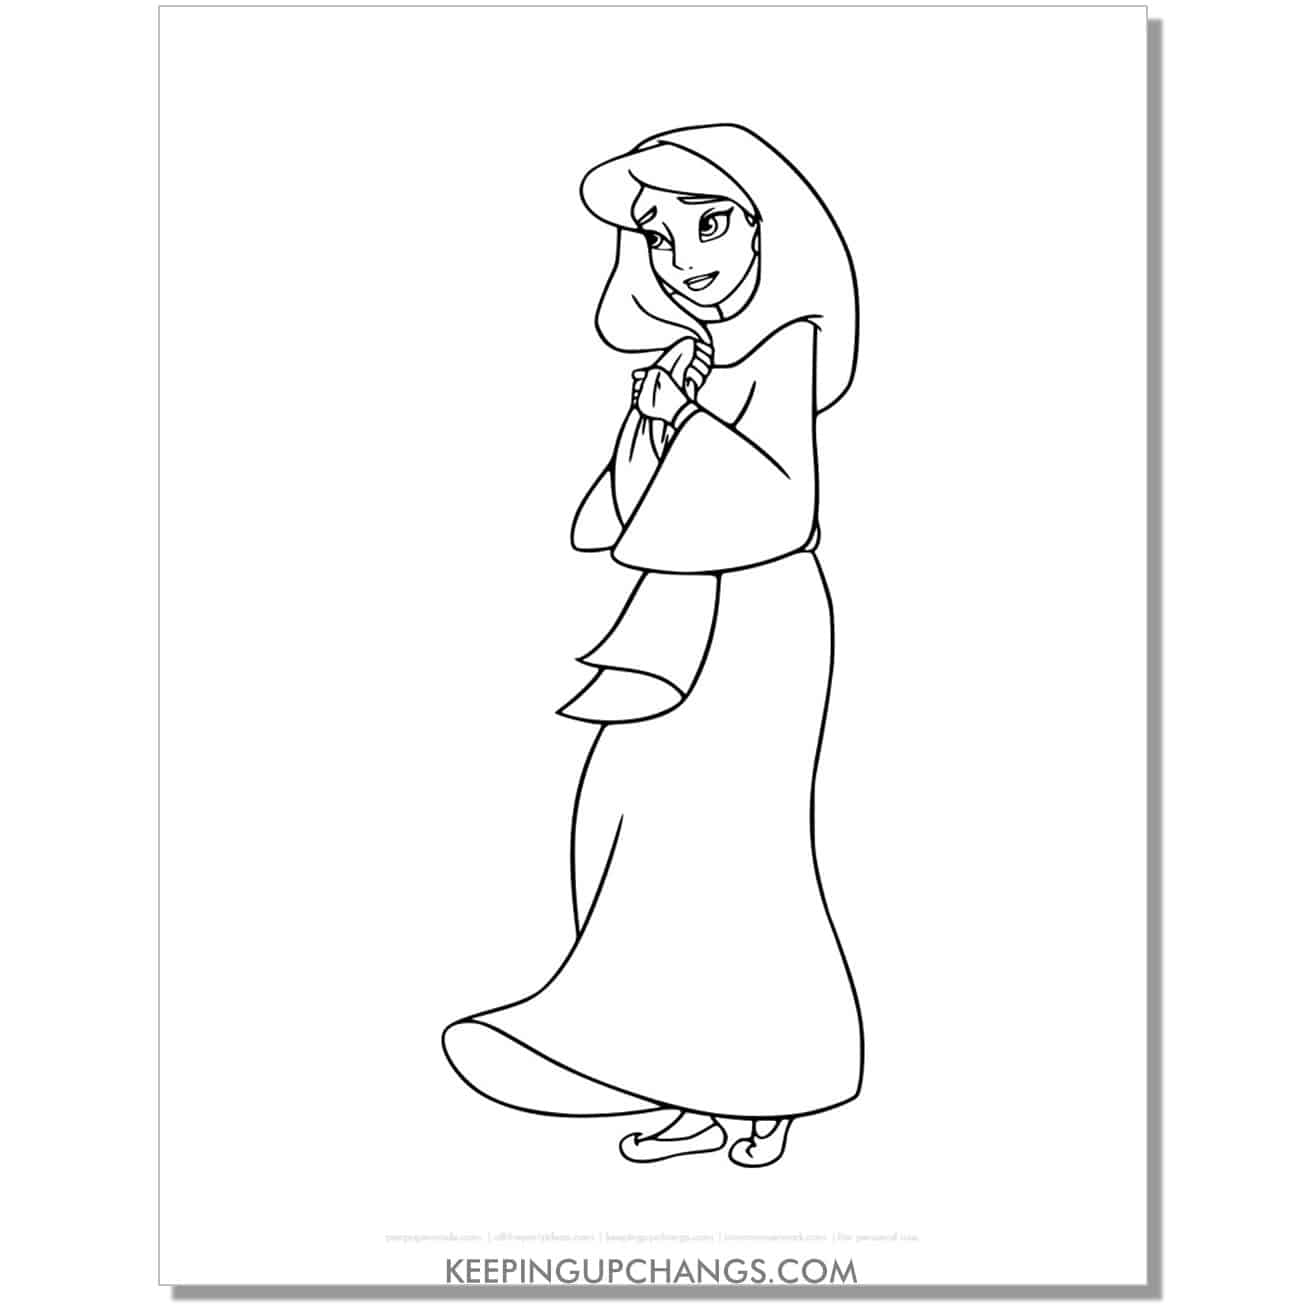 jasmine with head covering as civilian coloring page, sheet.